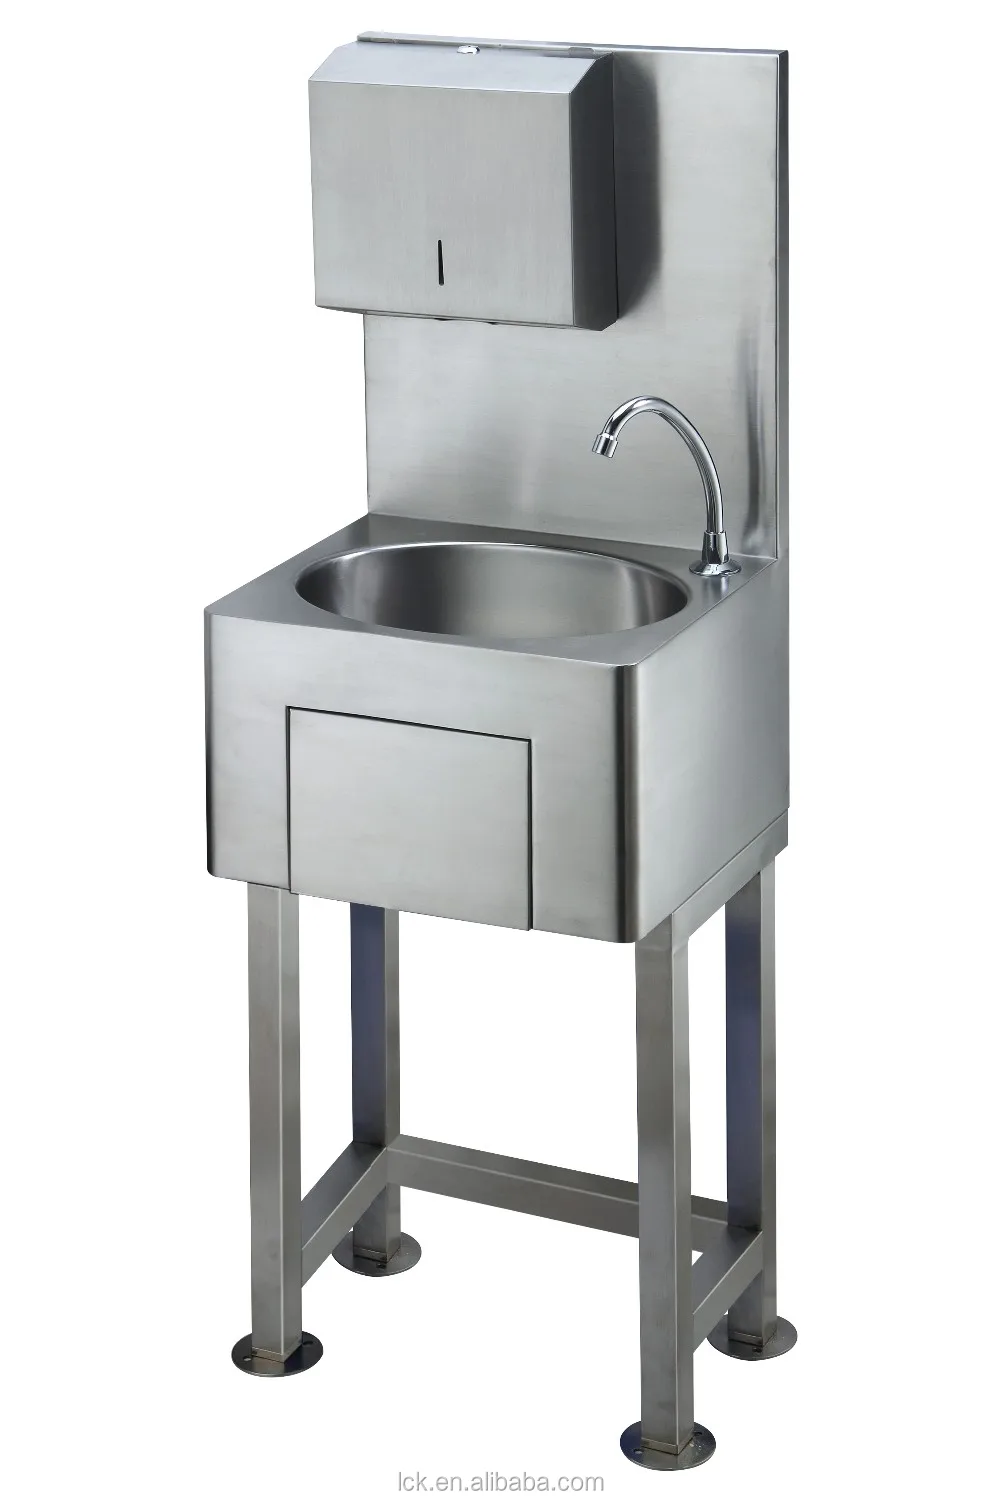 Free Standing Commercial Kitchen Sink Stainless Steel Freestanding Kitchen Sink Stainless Steel Outdoor Sink Buy Freestanding Kitchen Sink Outdoor Sink Deep Drawing Sink Product On Alibaba Com